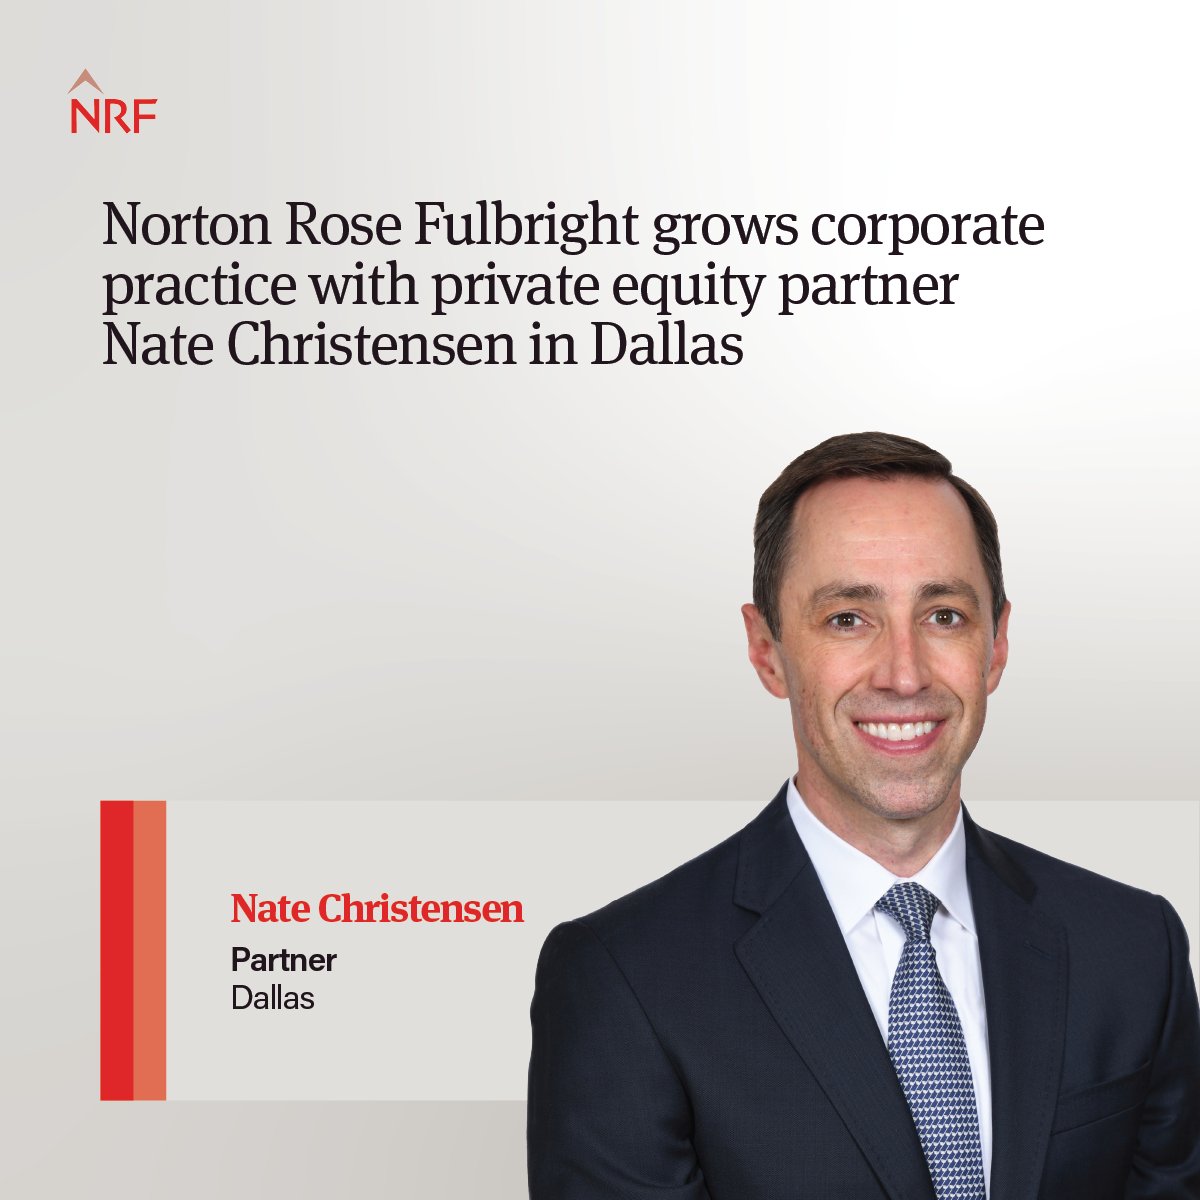 We’re excited to announce that private equity lawyer Nate Christensen has joined our firm’s corporate, M&A and securities practice as a partner in the Dallas office. ow.ly/Hluj50Ry0G1